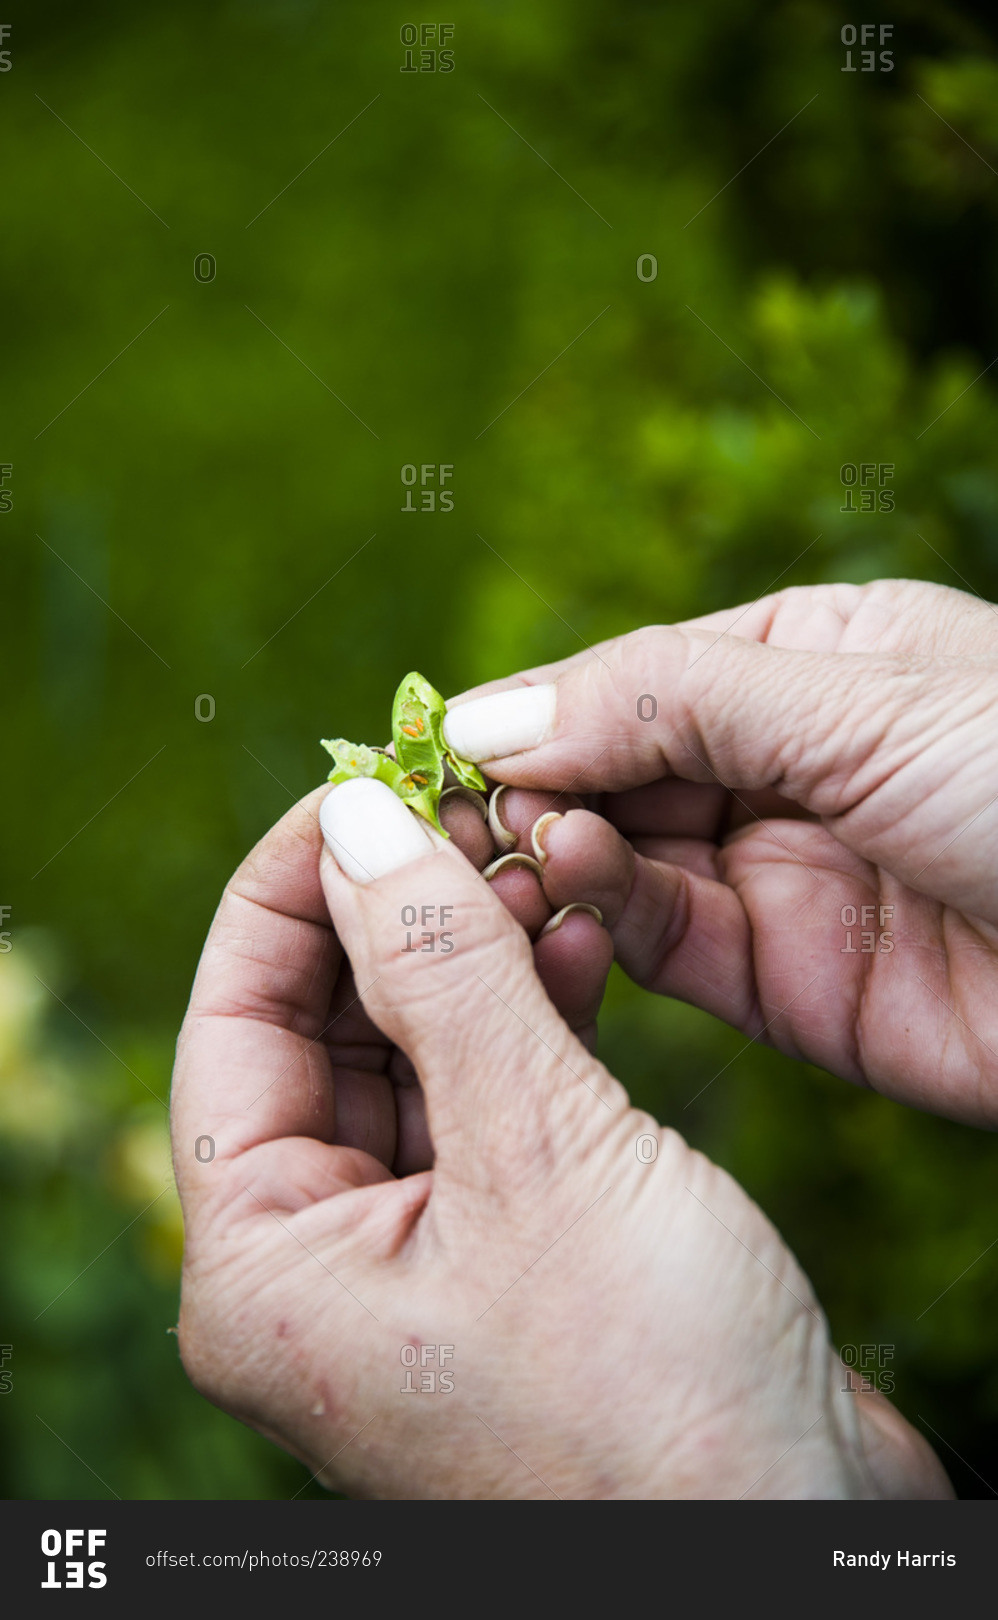 A woman opens a leaf to reveal a leaf miner insect